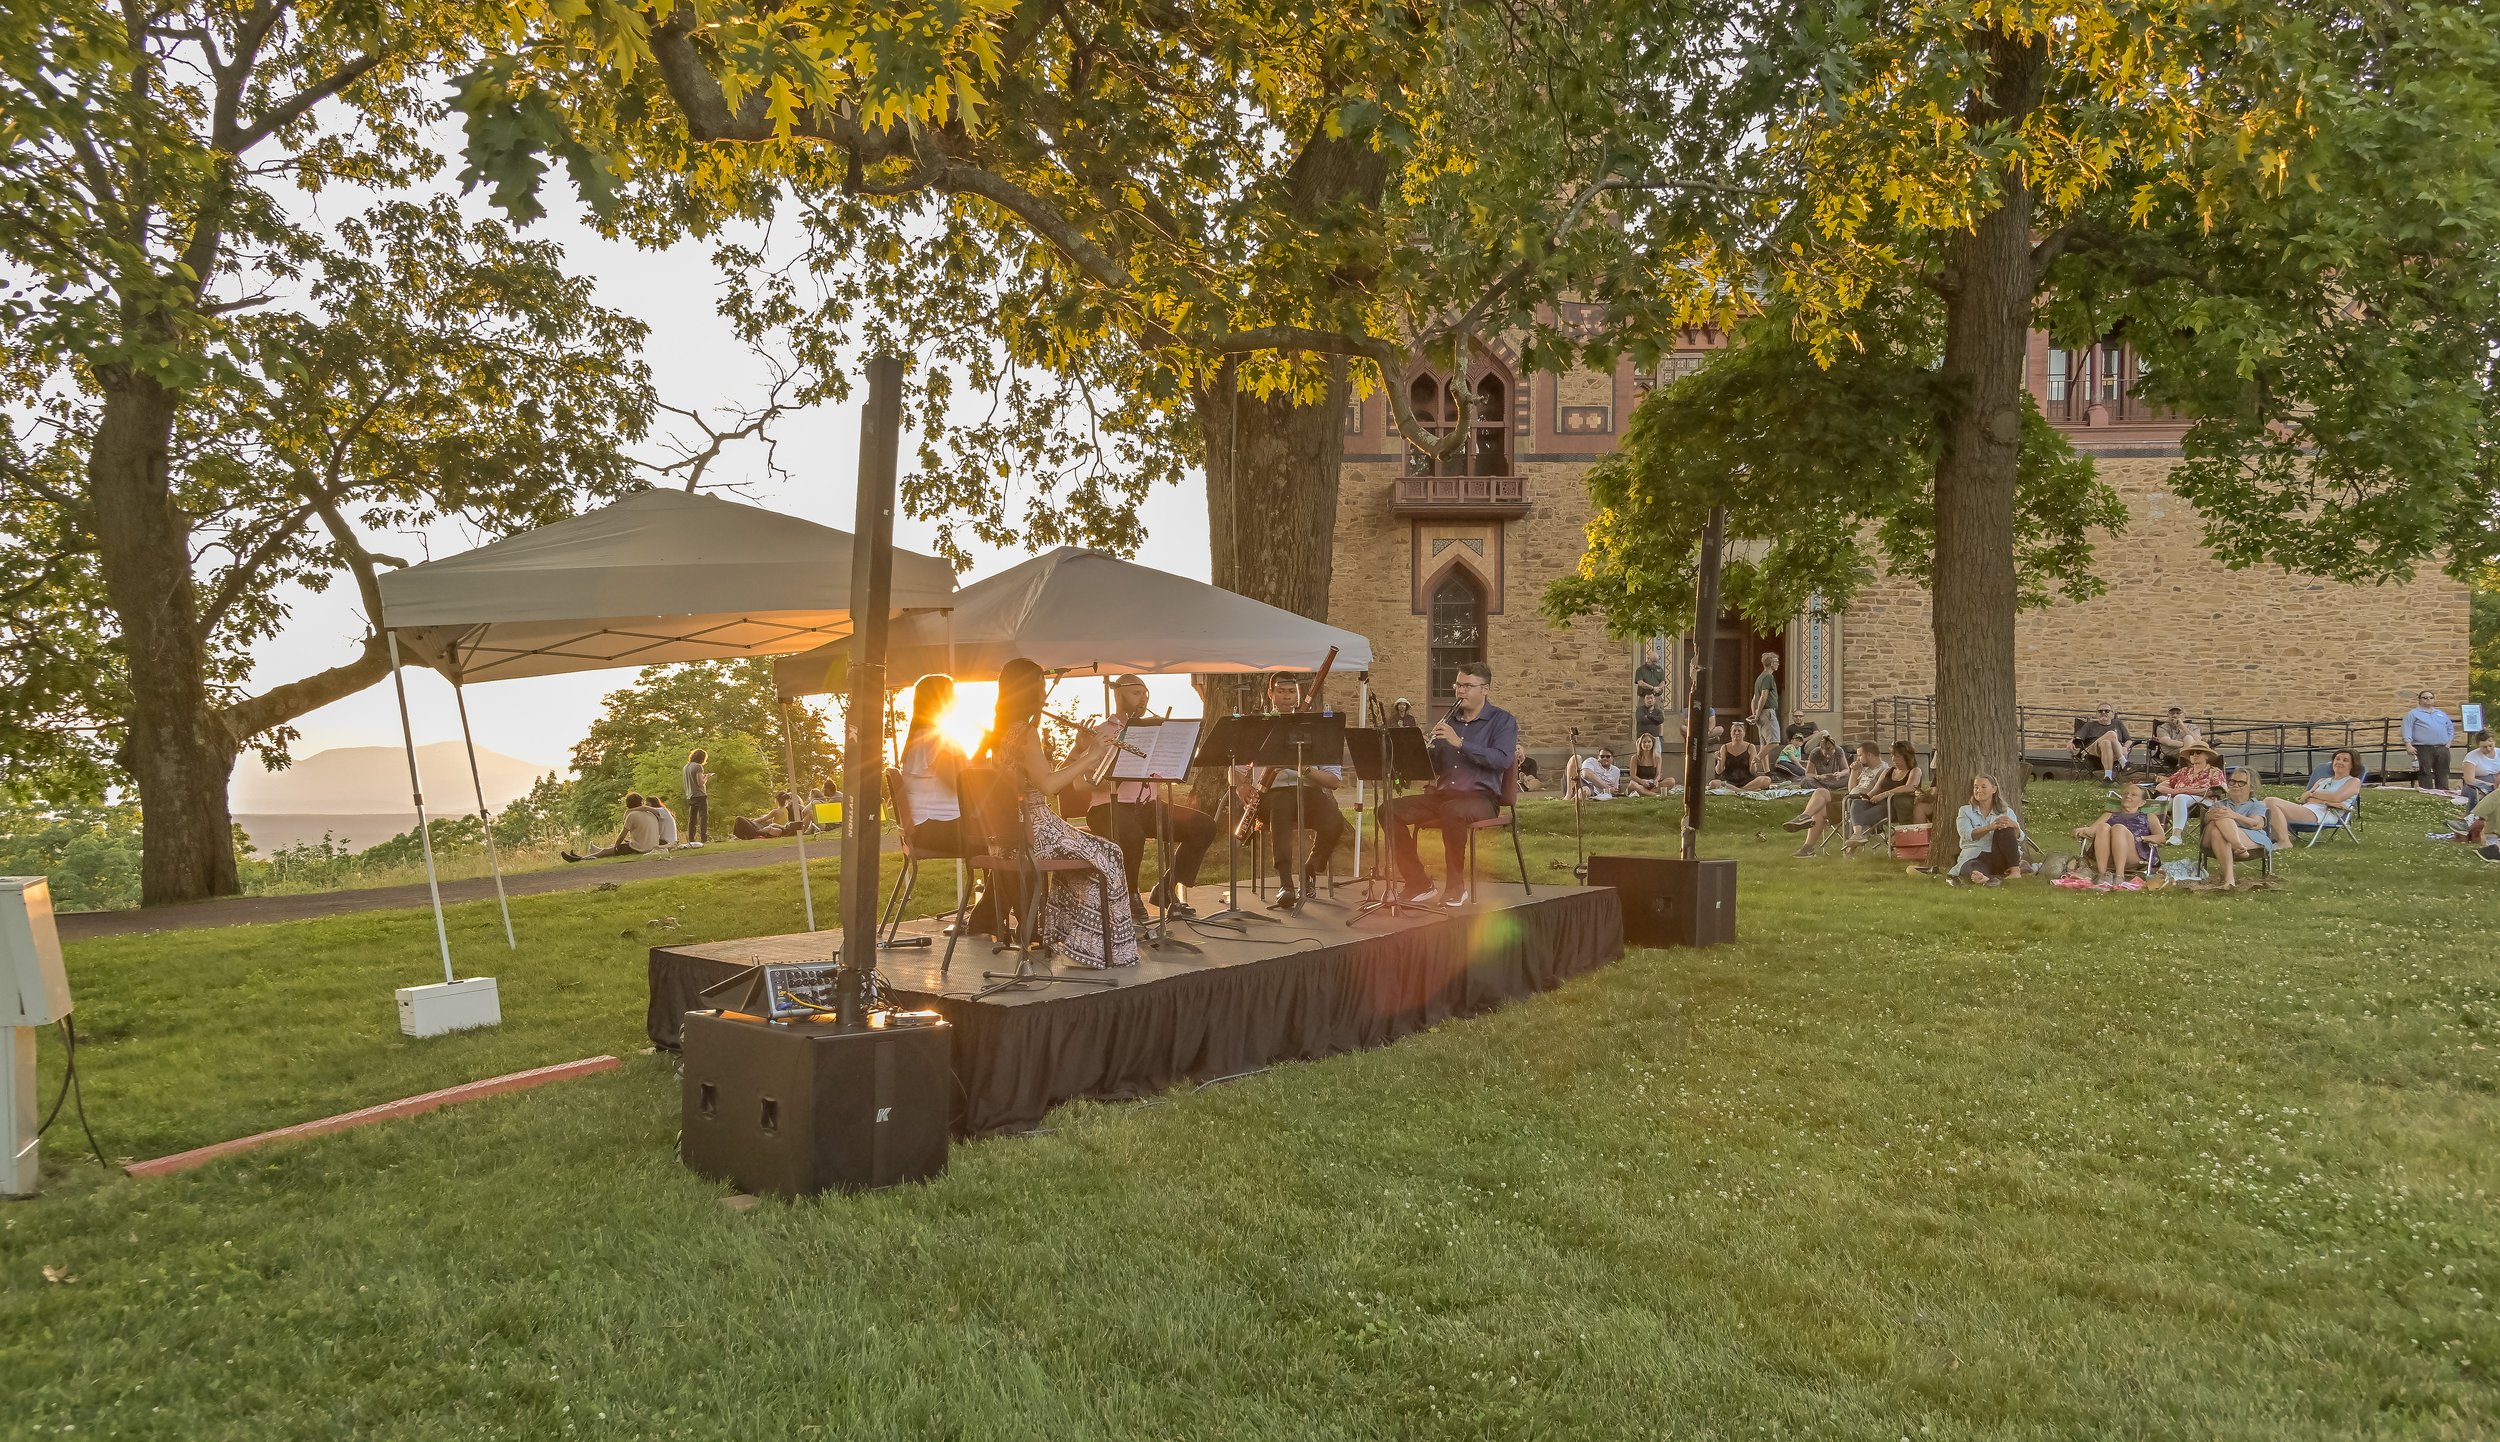  Bring a blanket or lawn chairs for a free outdoor performance by an Albany Symphony Quintet. 